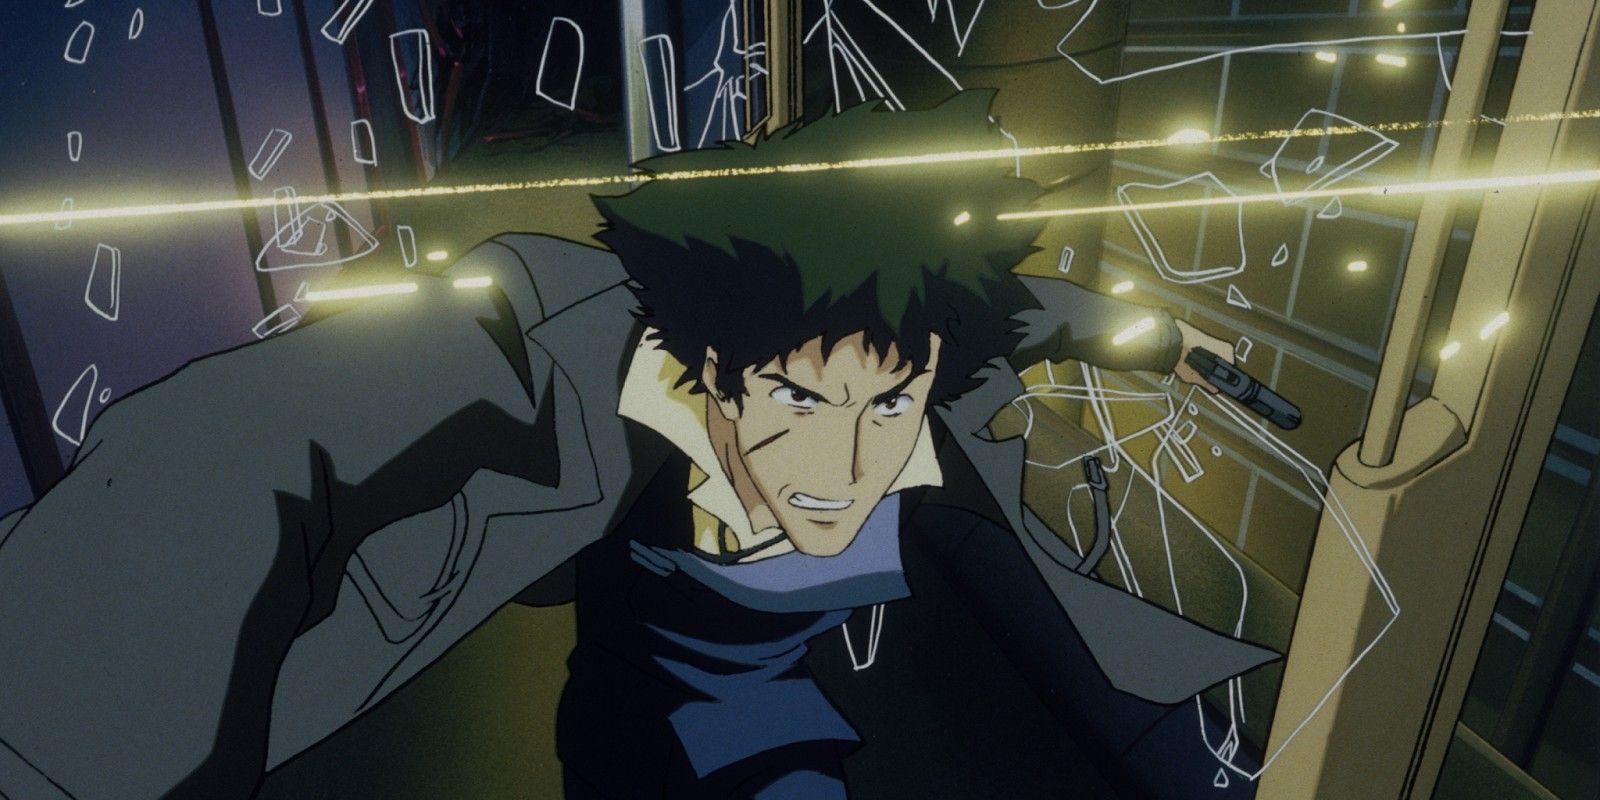 Spike storms the syndicate on his own in Cowboy Bebop